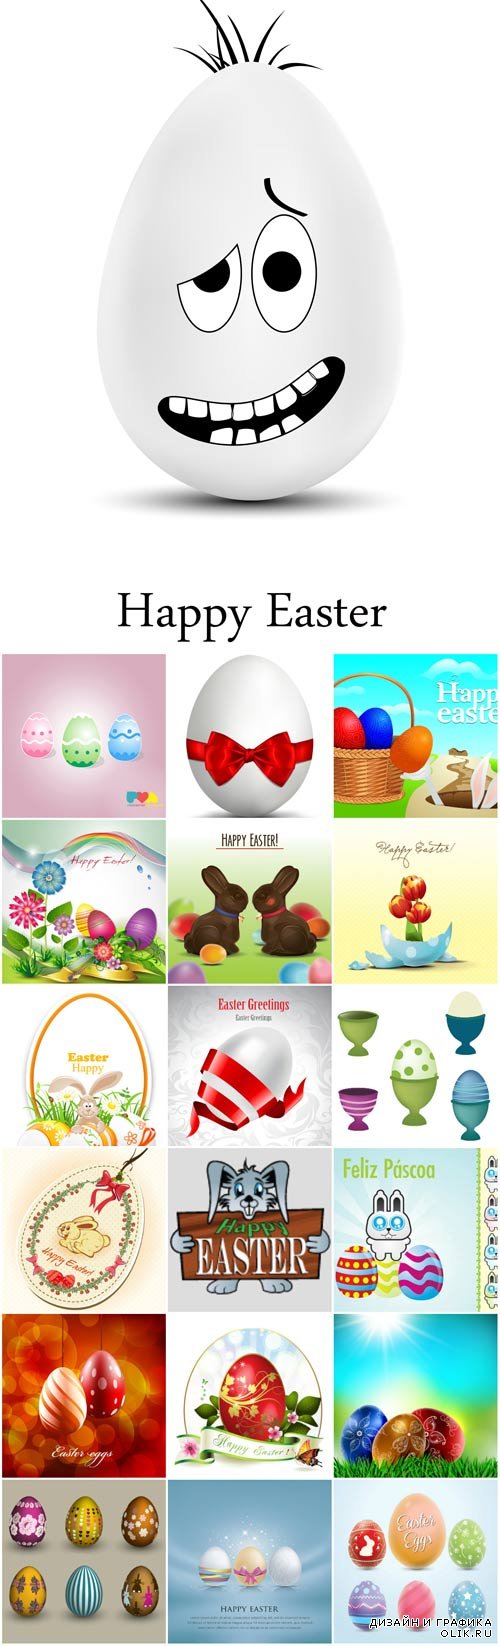 Easter backgrounds and cards vector - 2